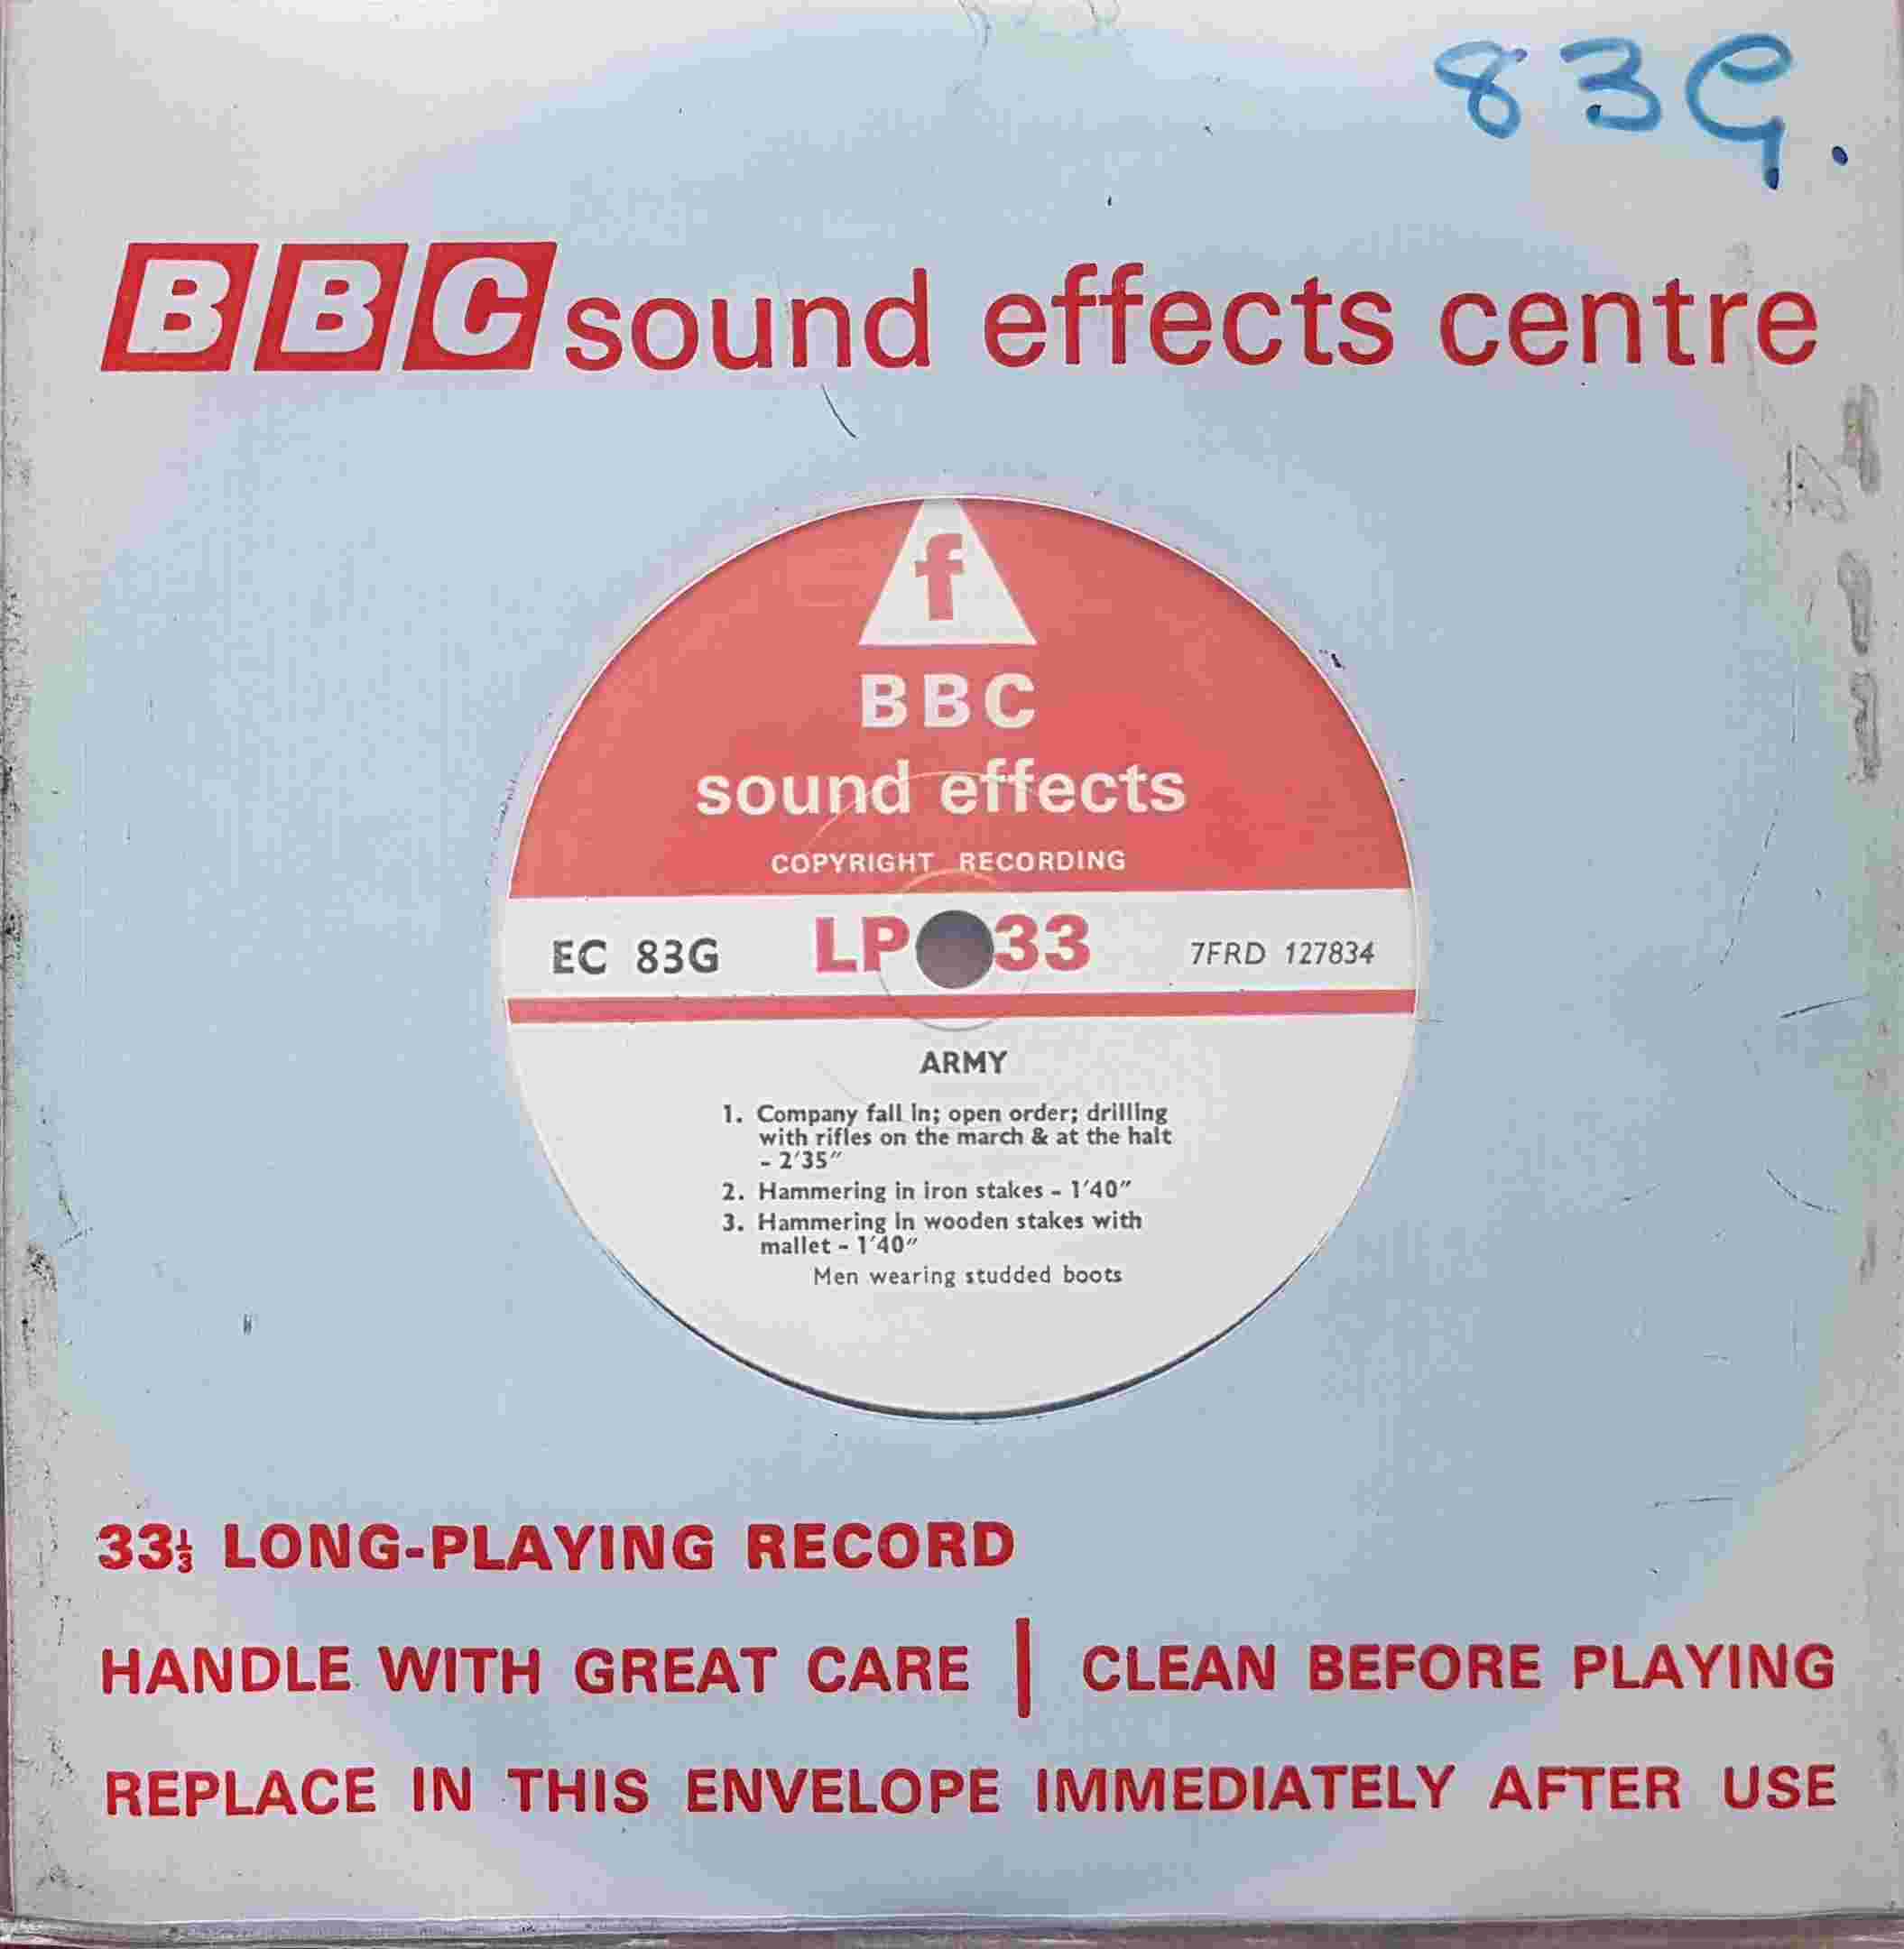 Picture of EC 83G Army by artist Not registered from the BBC singles - Records and Tapes library